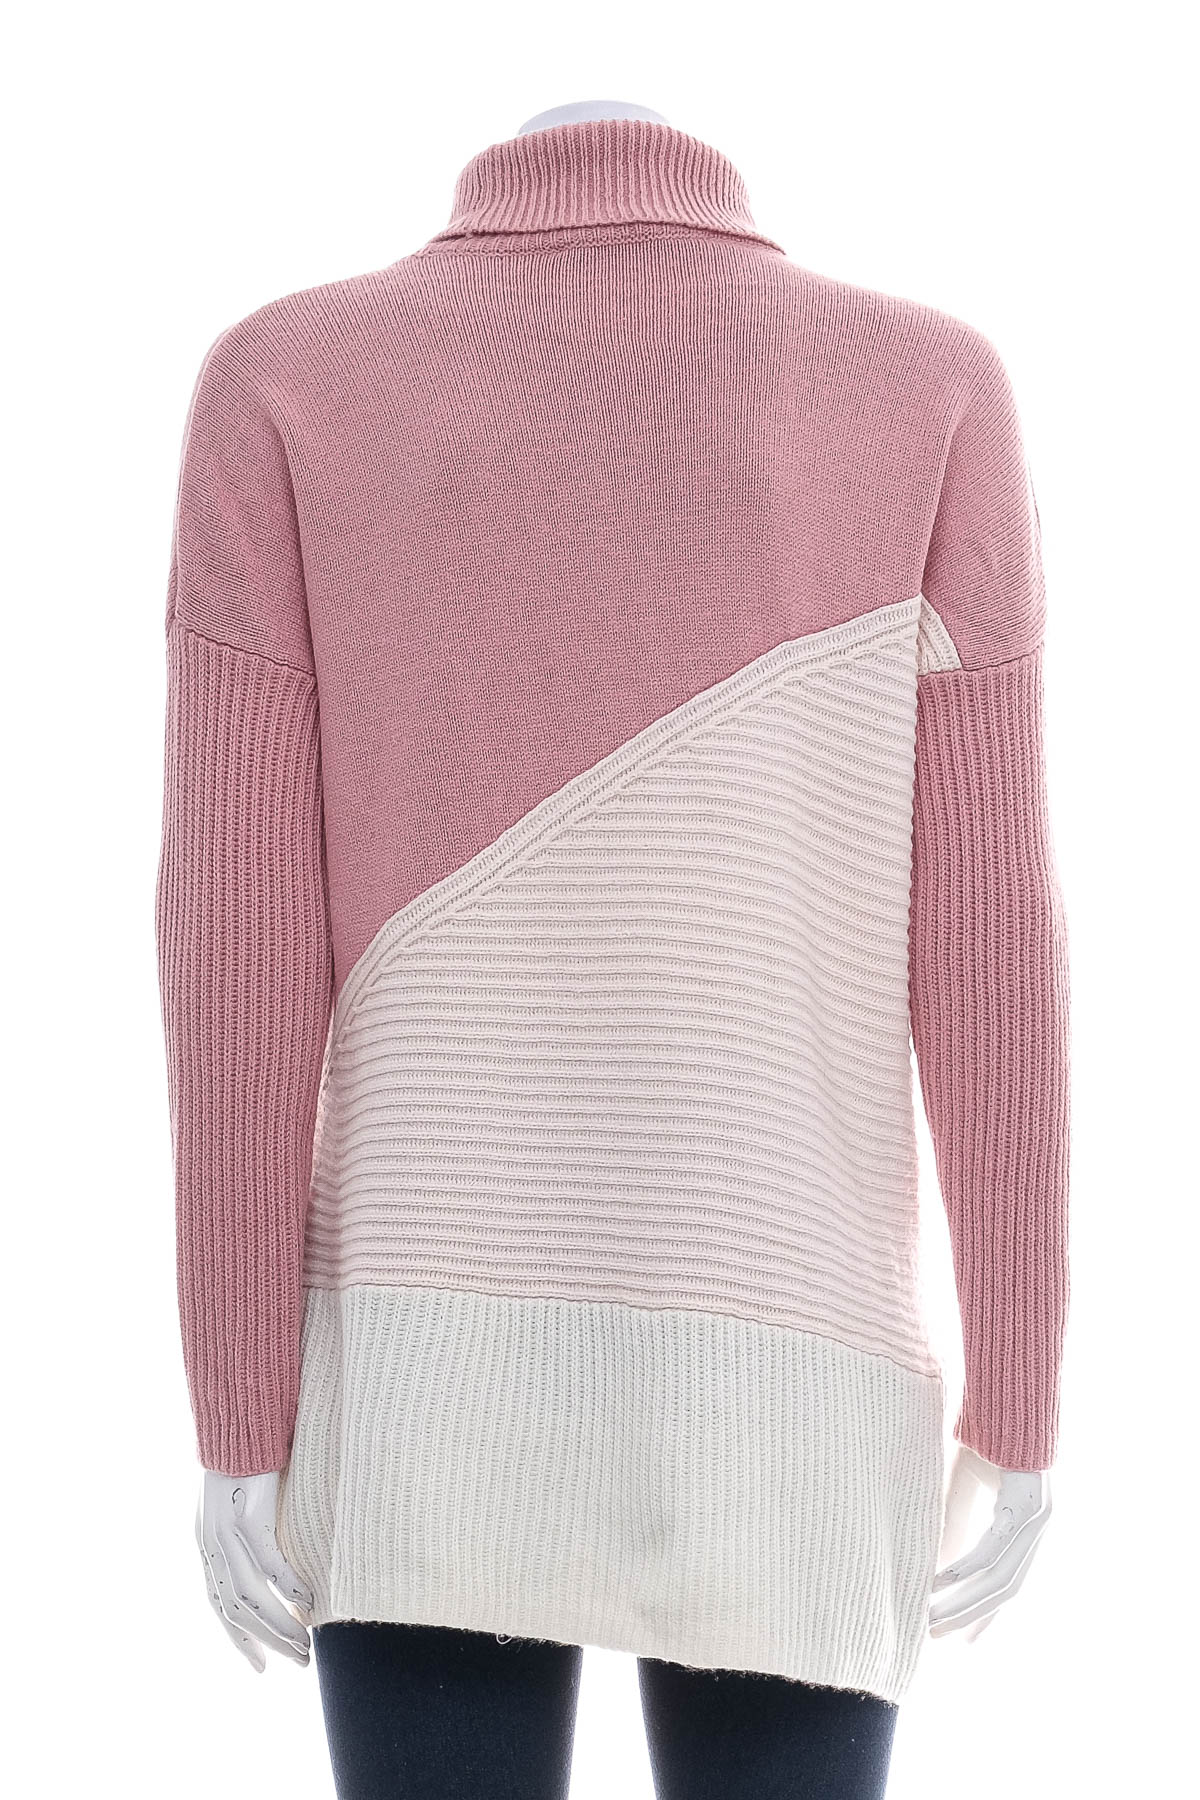 Women's sweater - French Connection - 1